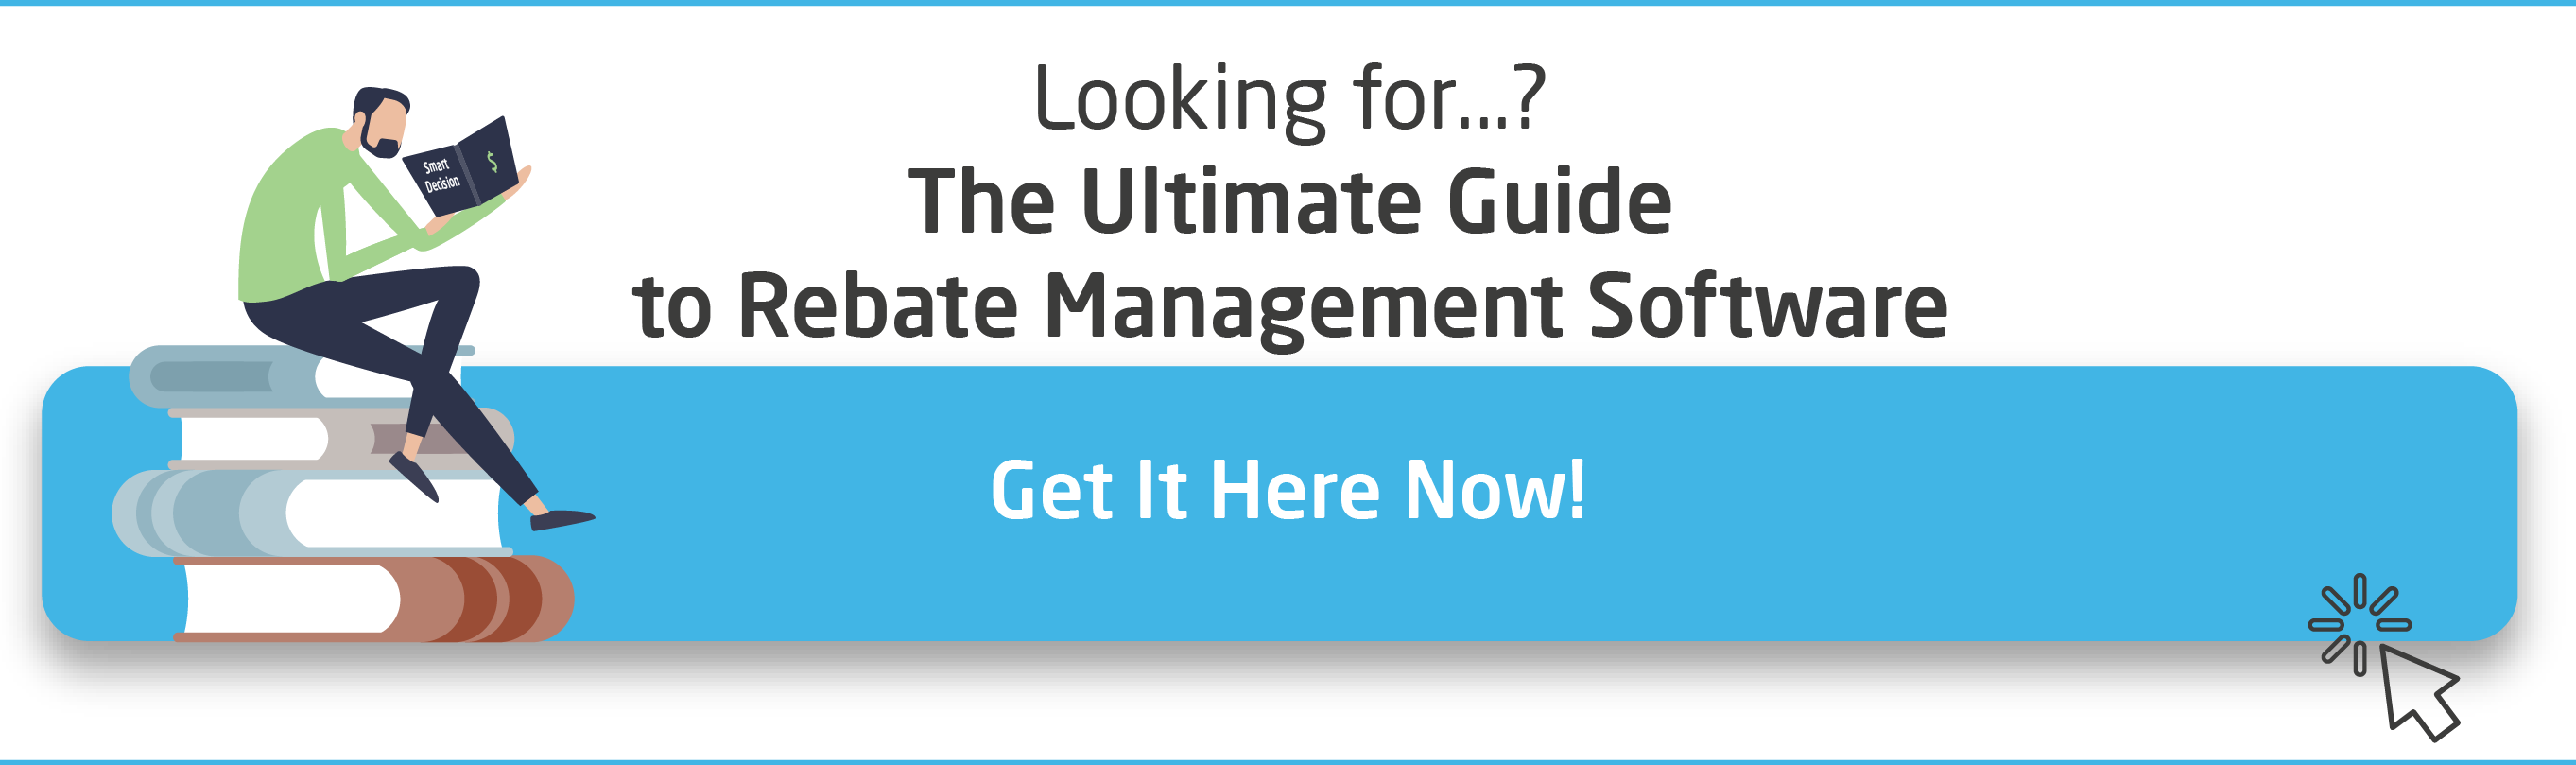 CTA-the-ultimate-guide-to-rebate-management-software